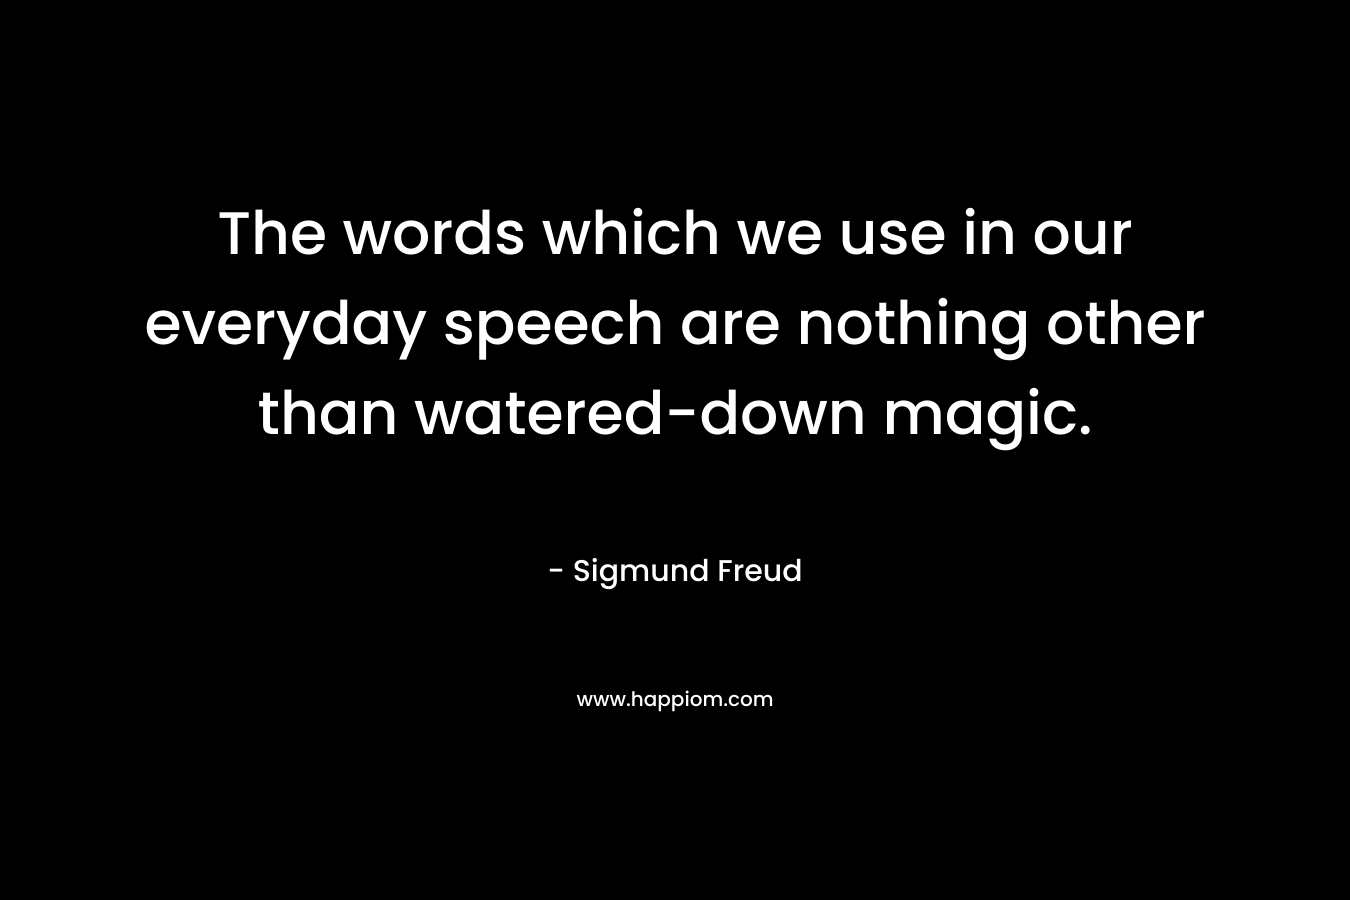 The words which we use in our everyday speech are nothing other than watered-down magic.